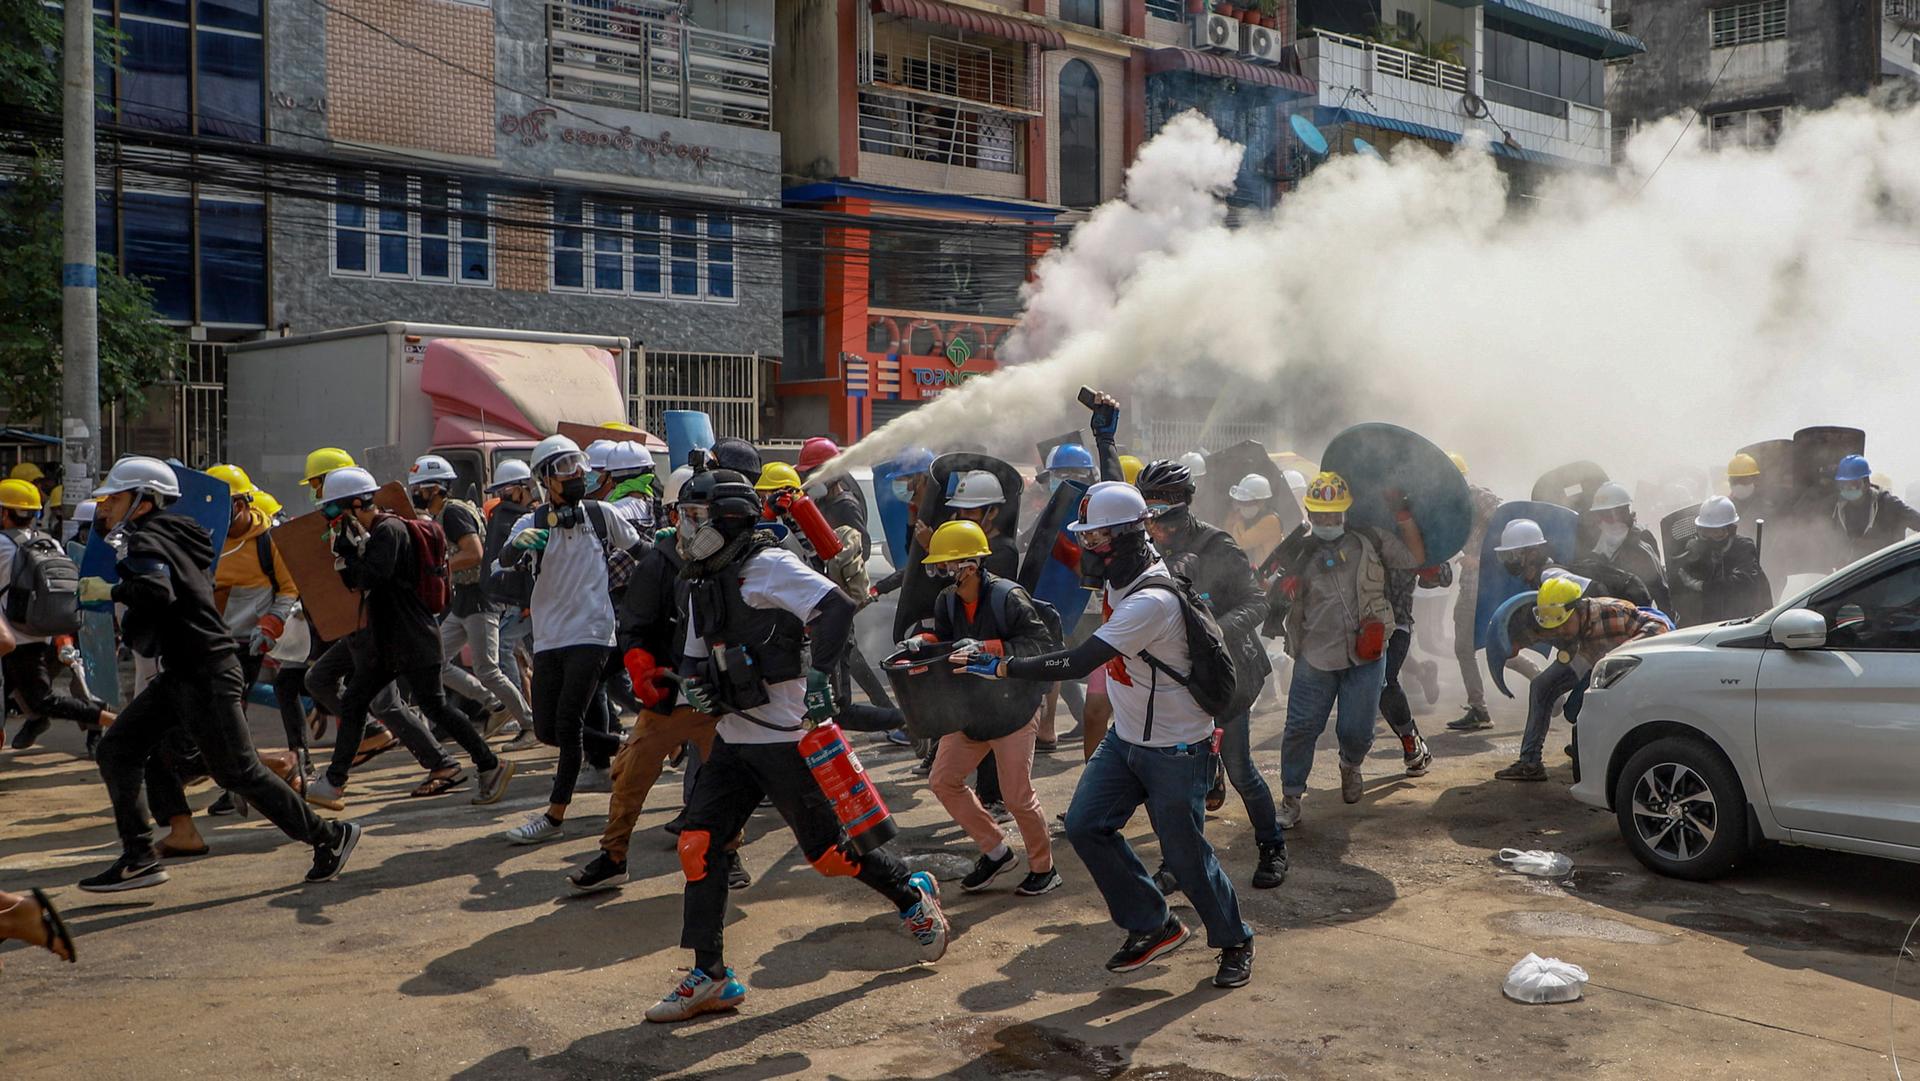 A large crowd of people are shown, many wearing construction hard hats, as one of them sprays a fire extinguisher into the air in the street.